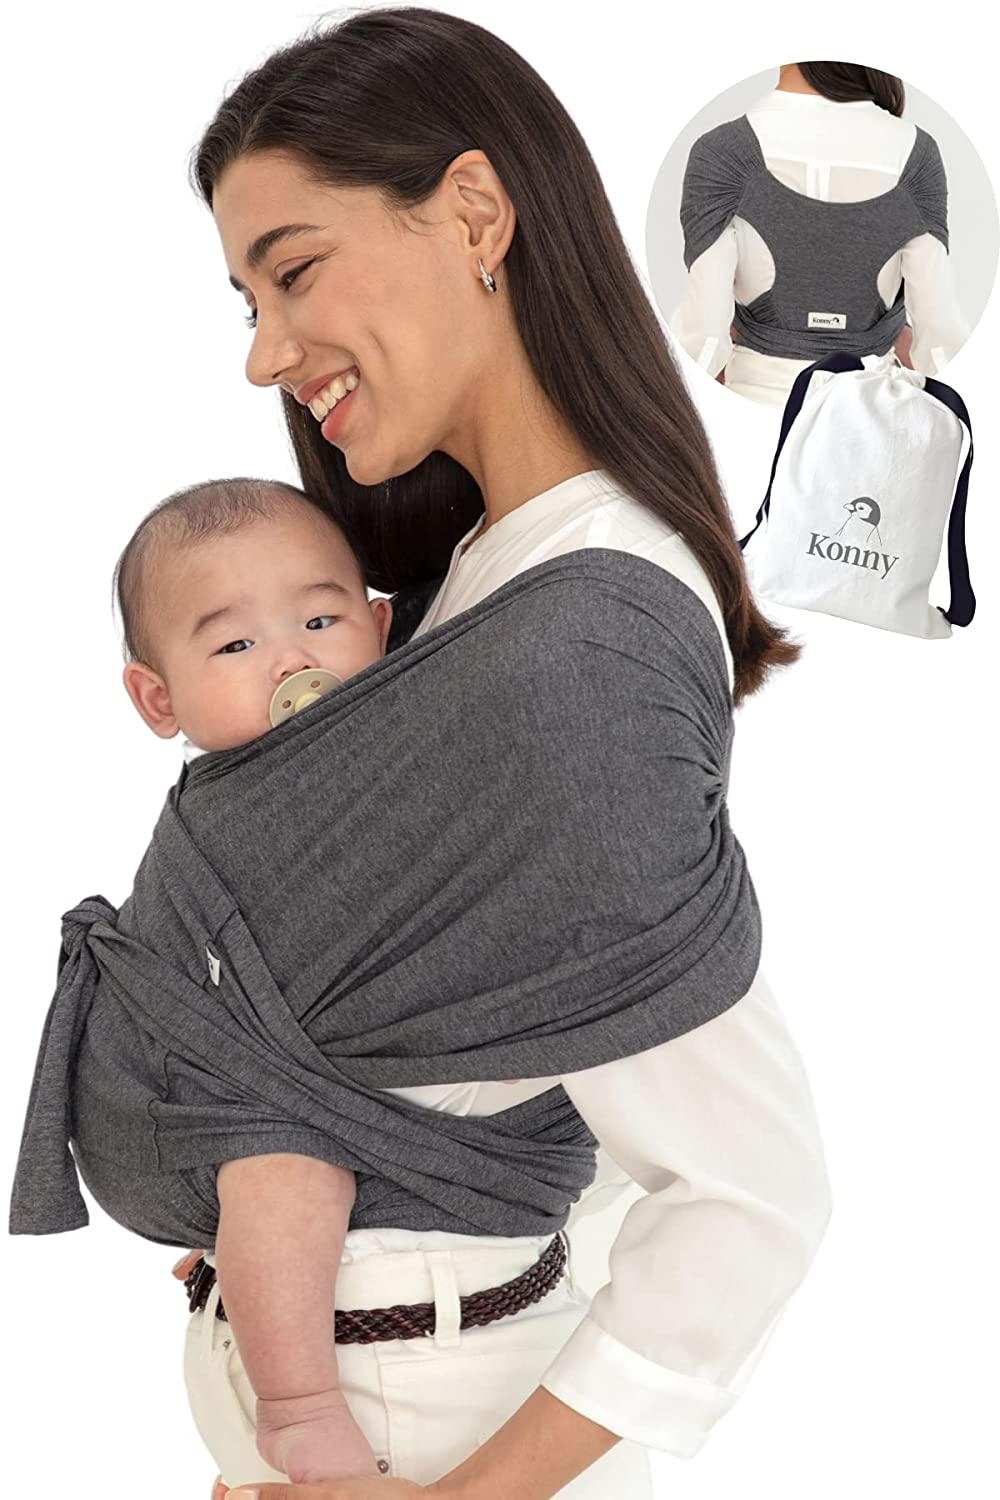 Konny Baby Carrier | Ultra-Light, Easy Swaddle | Newborns, Infants up to 20 kg Toddlers | Soft and Breathable Fabric | Useful Sleep Solution (Anthracite, L)